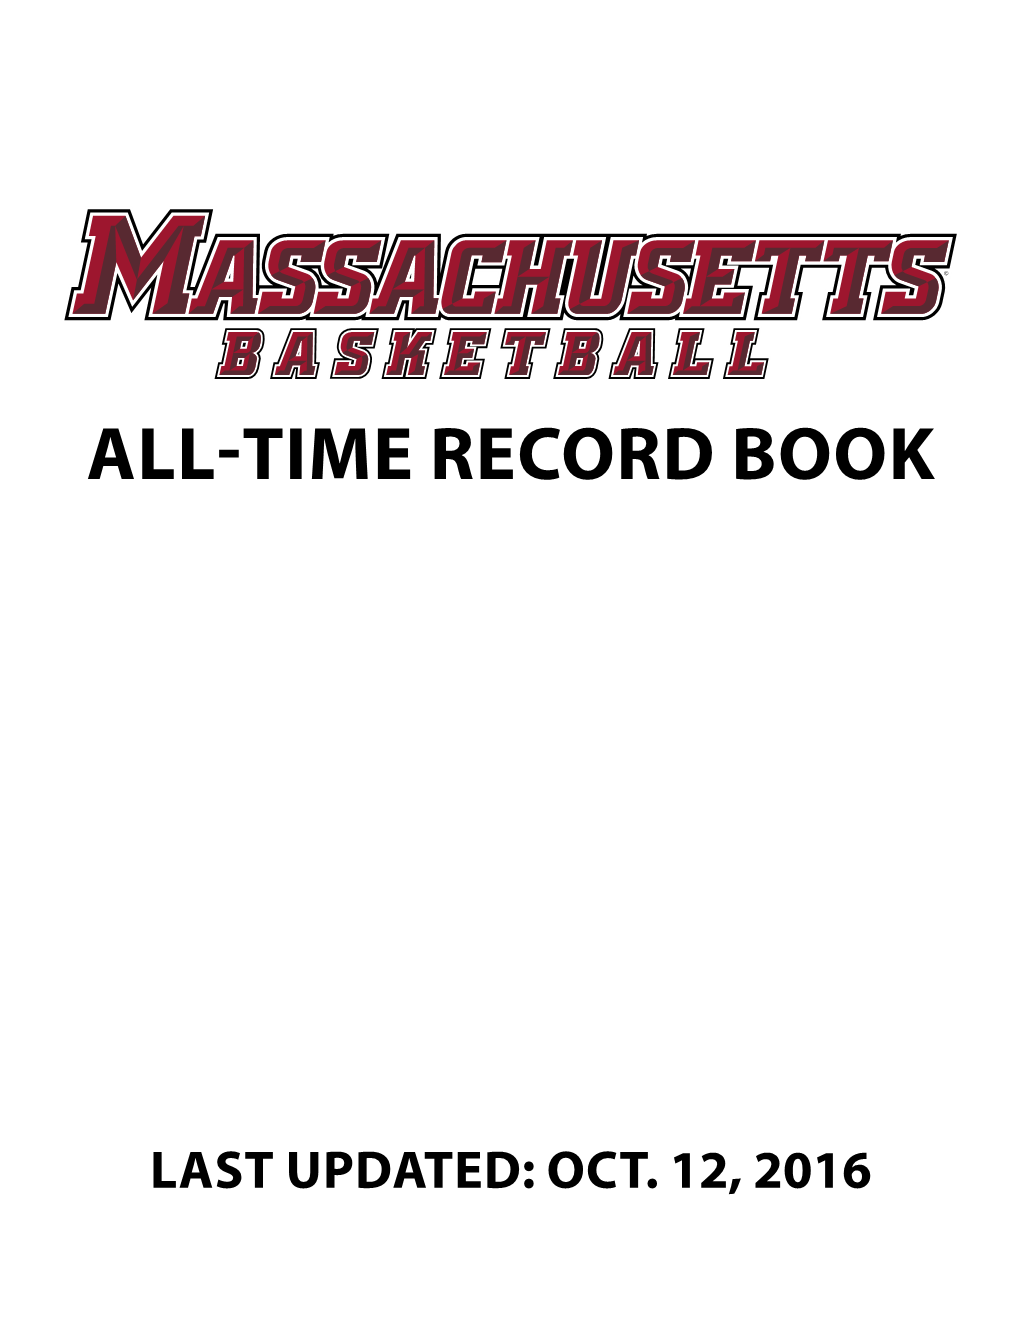 All-Time Record Book